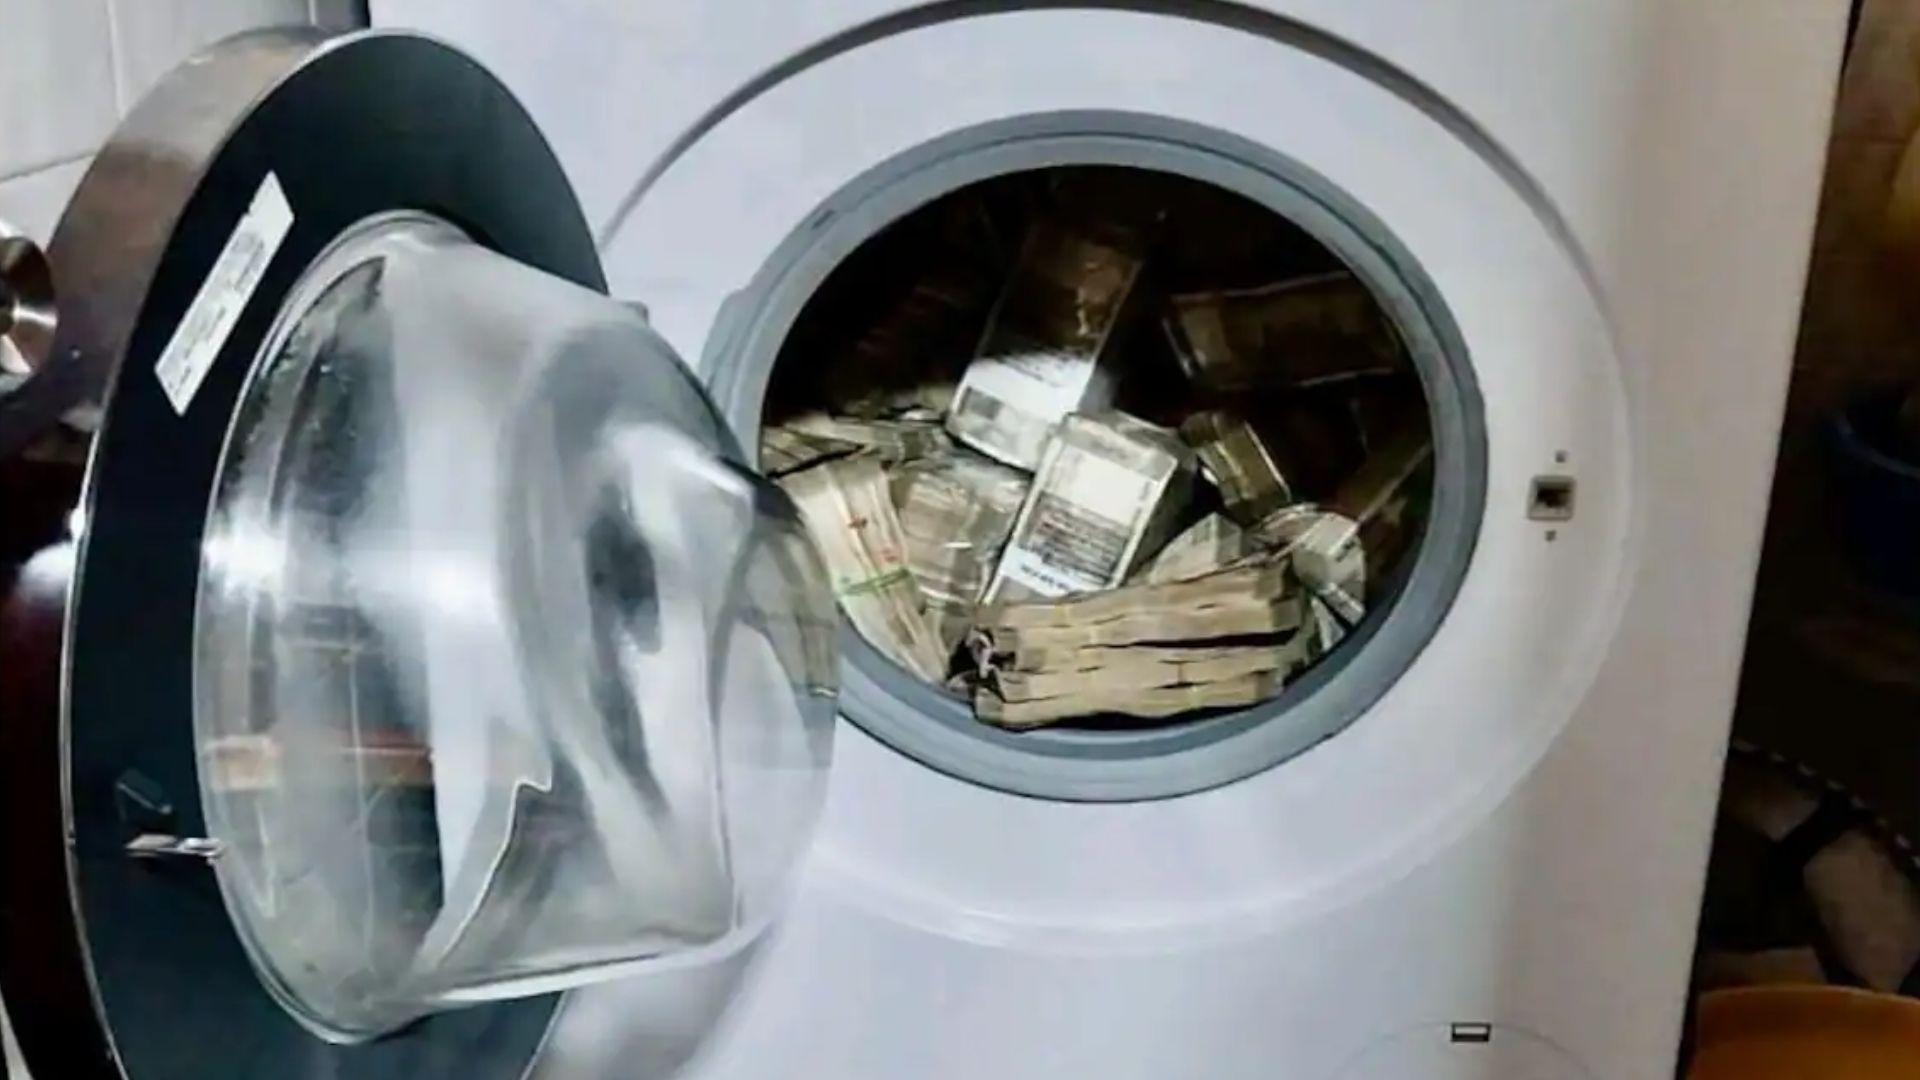 Probe Agency Discovers ₹ 2.5 Crore Stashed in Washing Machine